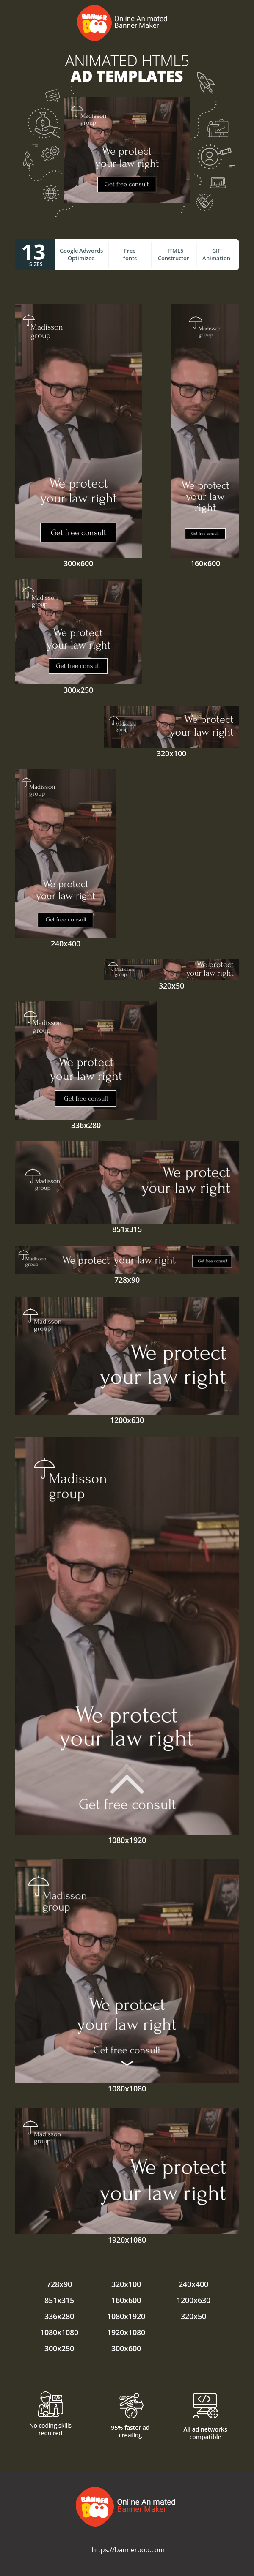 Banner ad template — We Protect Your Law Right — Lawyers